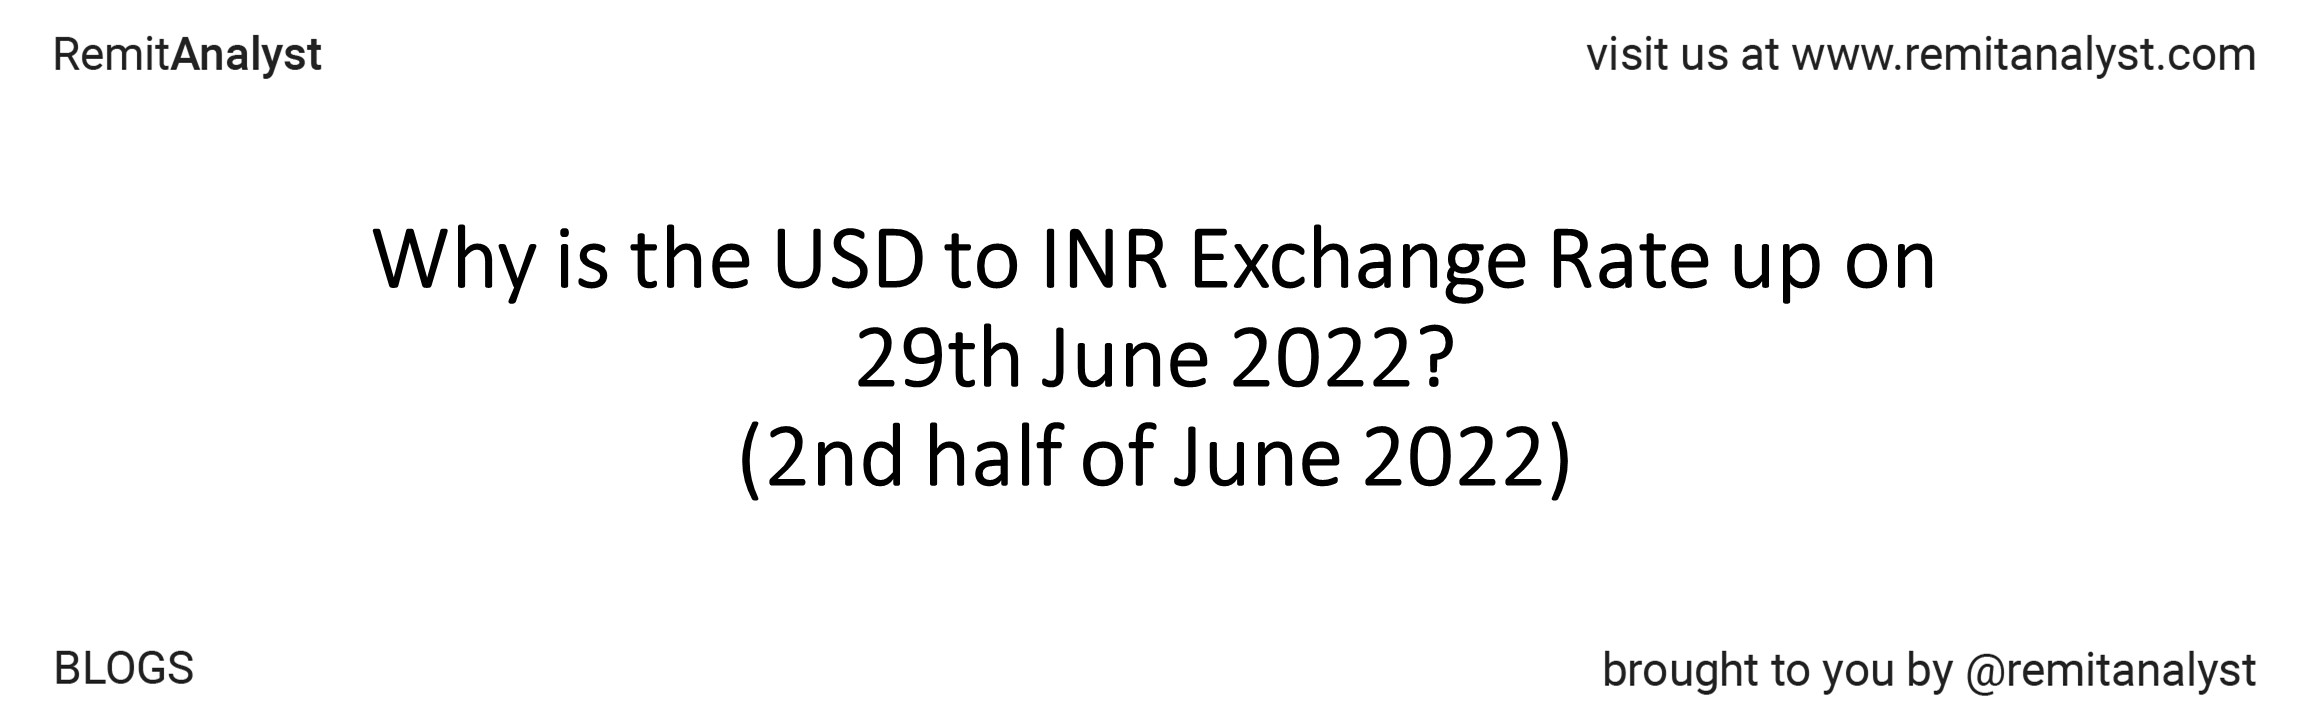 usd-to-inr-exchange-rate-13-June-2022-to-29-June-2022_title.jpg